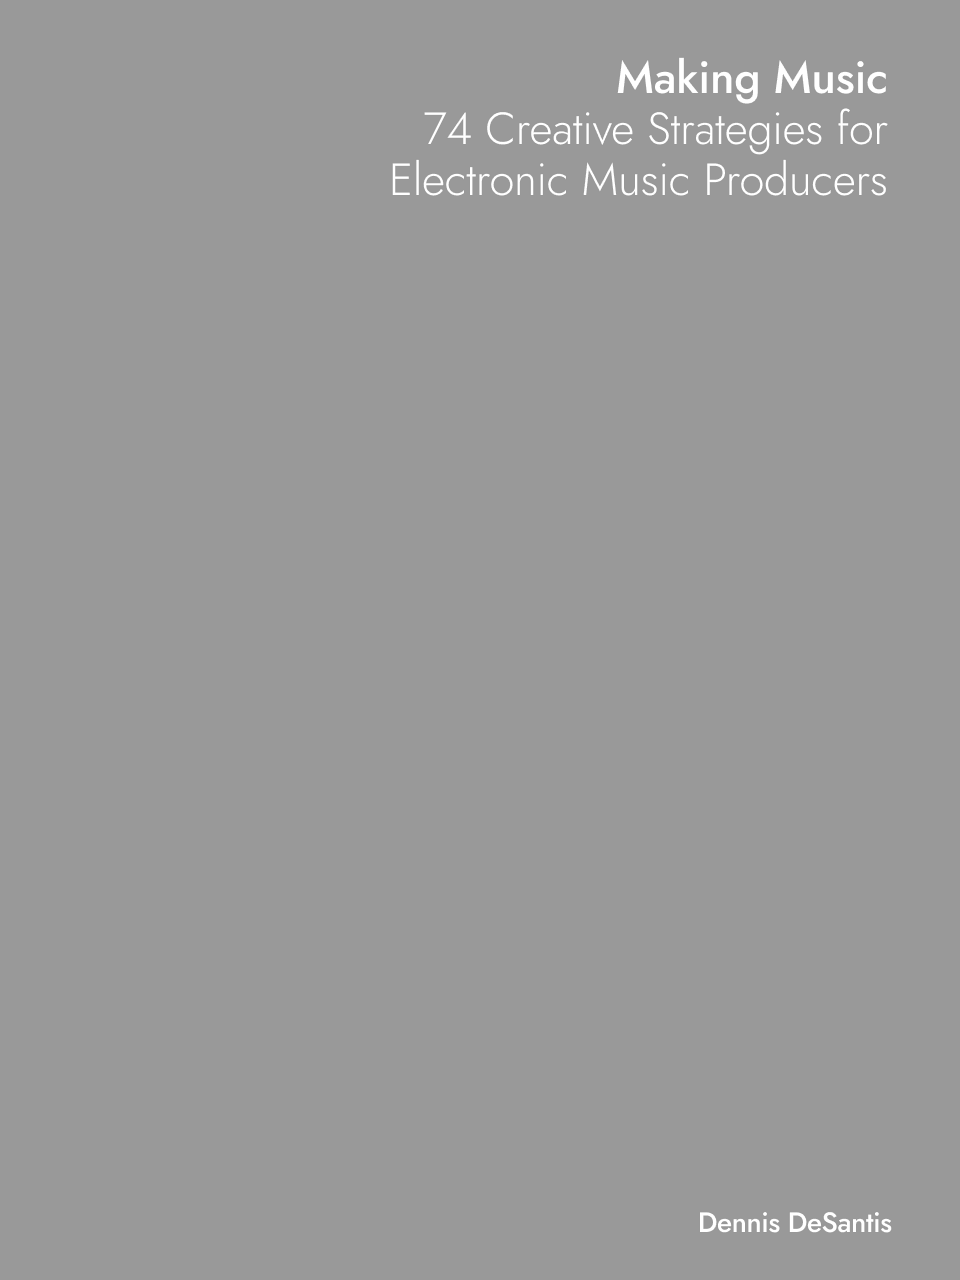 Making Music: 74 Creative Strategies for Electronic Music Producers by Dennis DeSantis